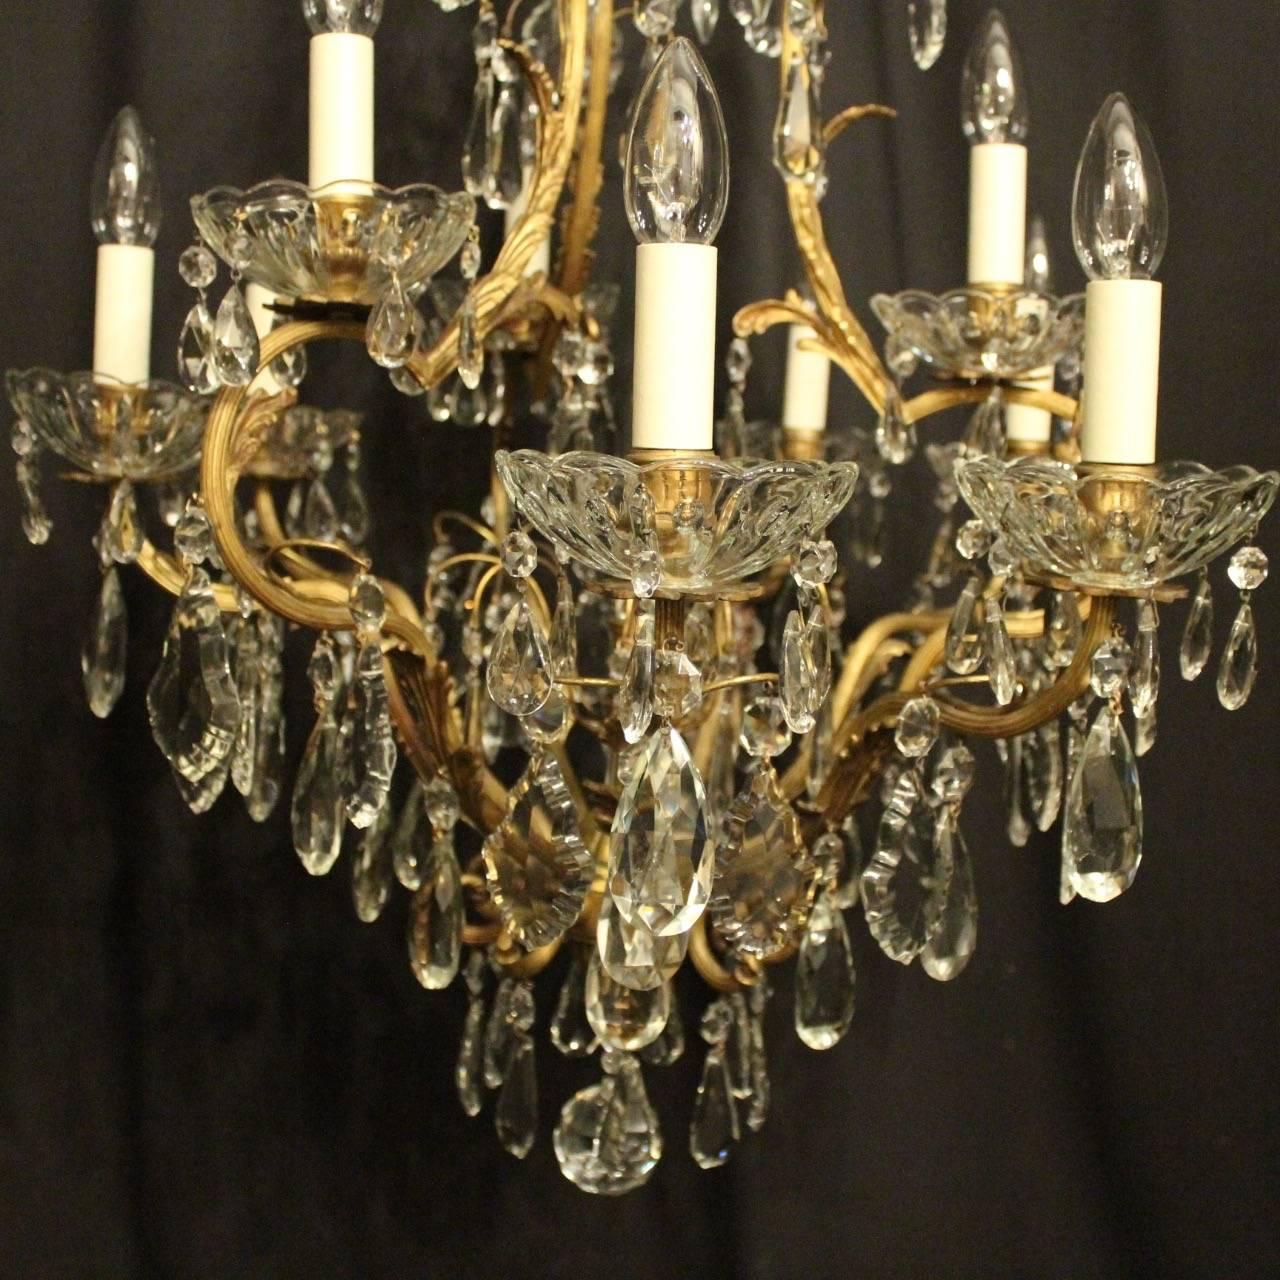 A French gilded bronze and crystal ten-light double tiered birdcage form antique chandelier, the nine reeded scrolling arms with glass bobeche drip pans and reeded candle sconces, issuing from an foliated cage form interior with a single inverted